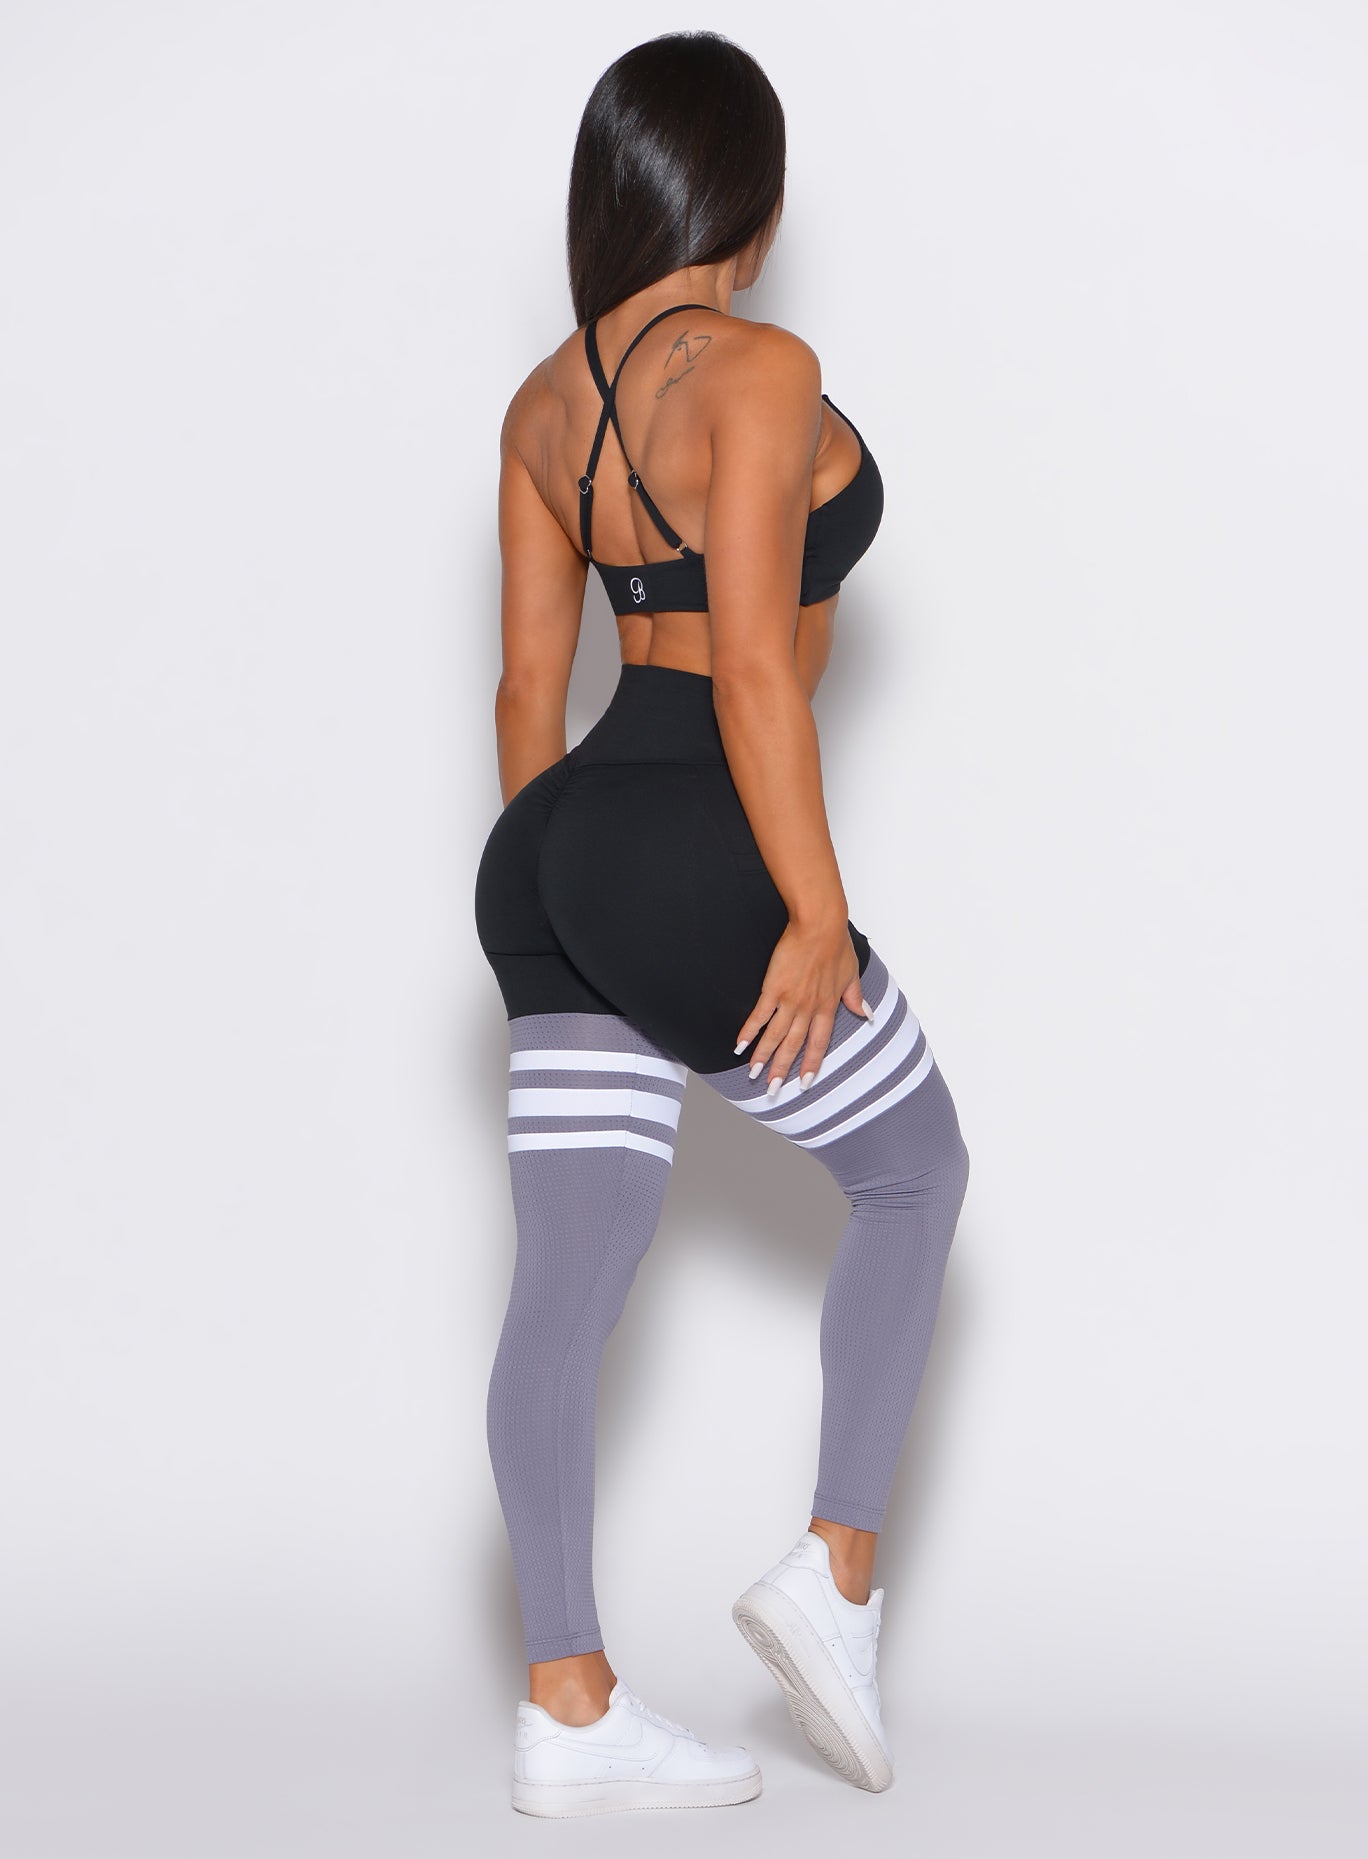 right side profile video of a model angled slightly to her left wearing our scrunch thigh high in black and gray color along with a black sports bra 